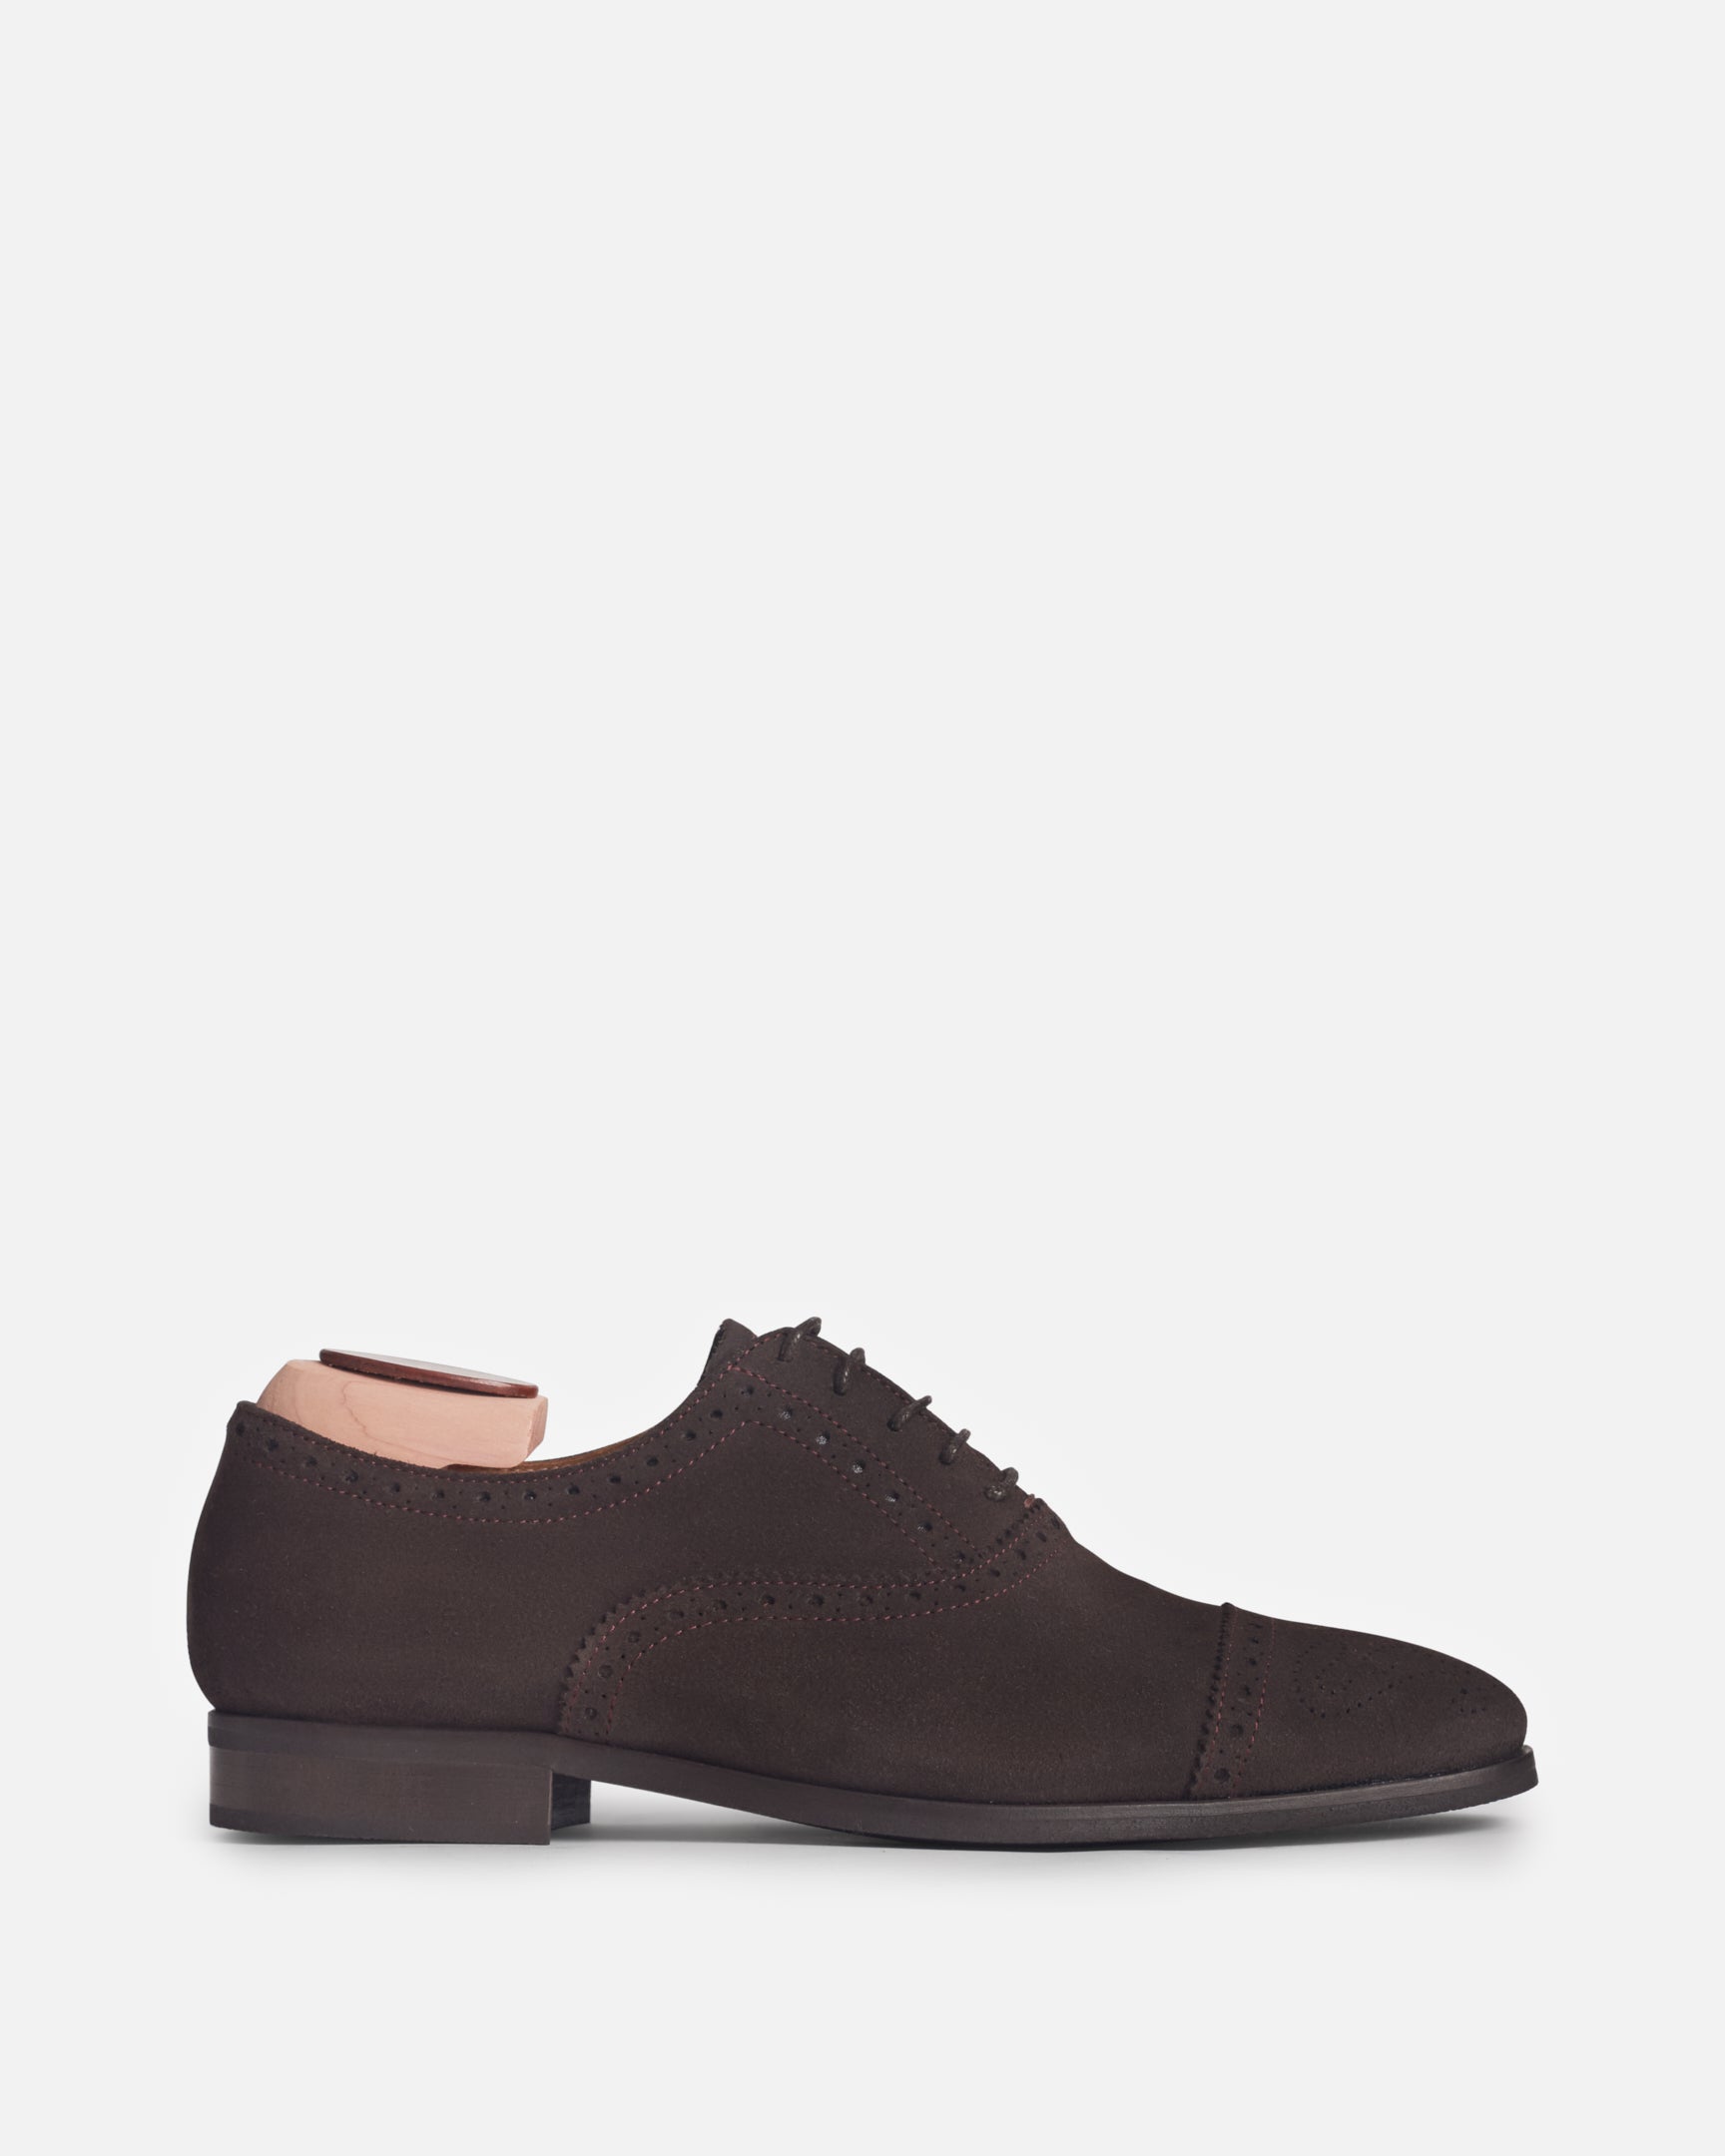 Ourense Suede Chocolate